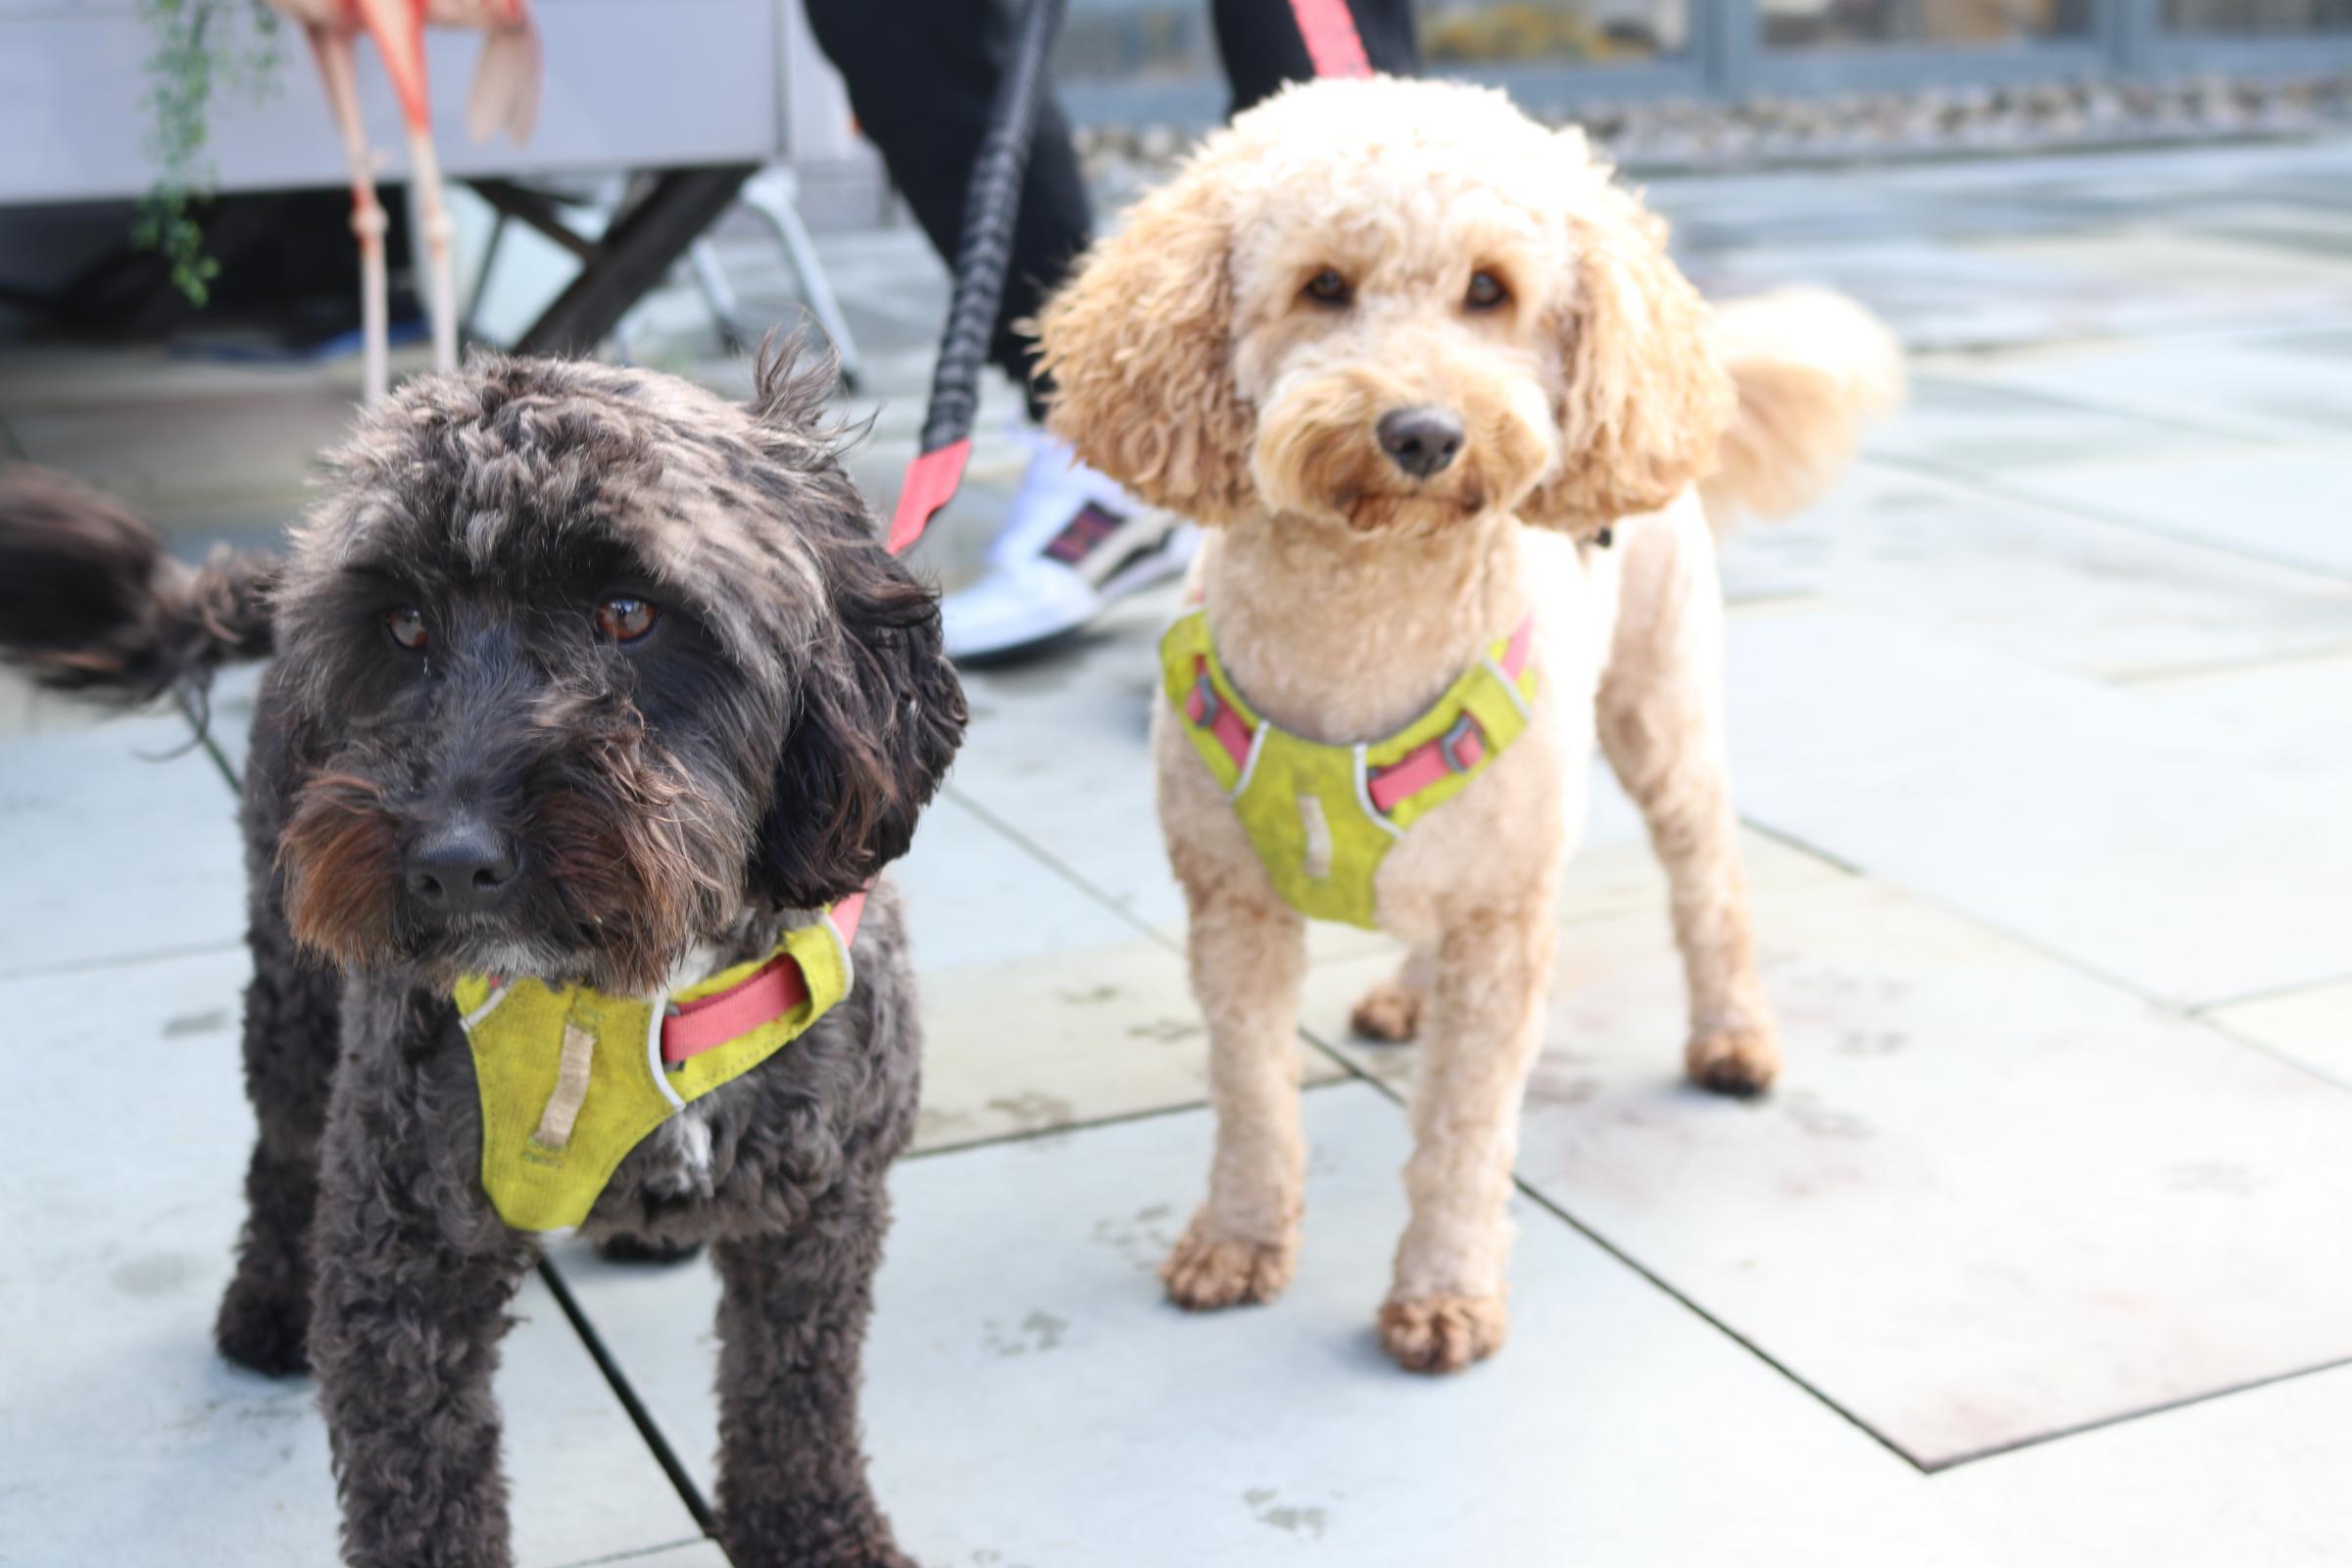 Street Food Sunday attracted furry fans too